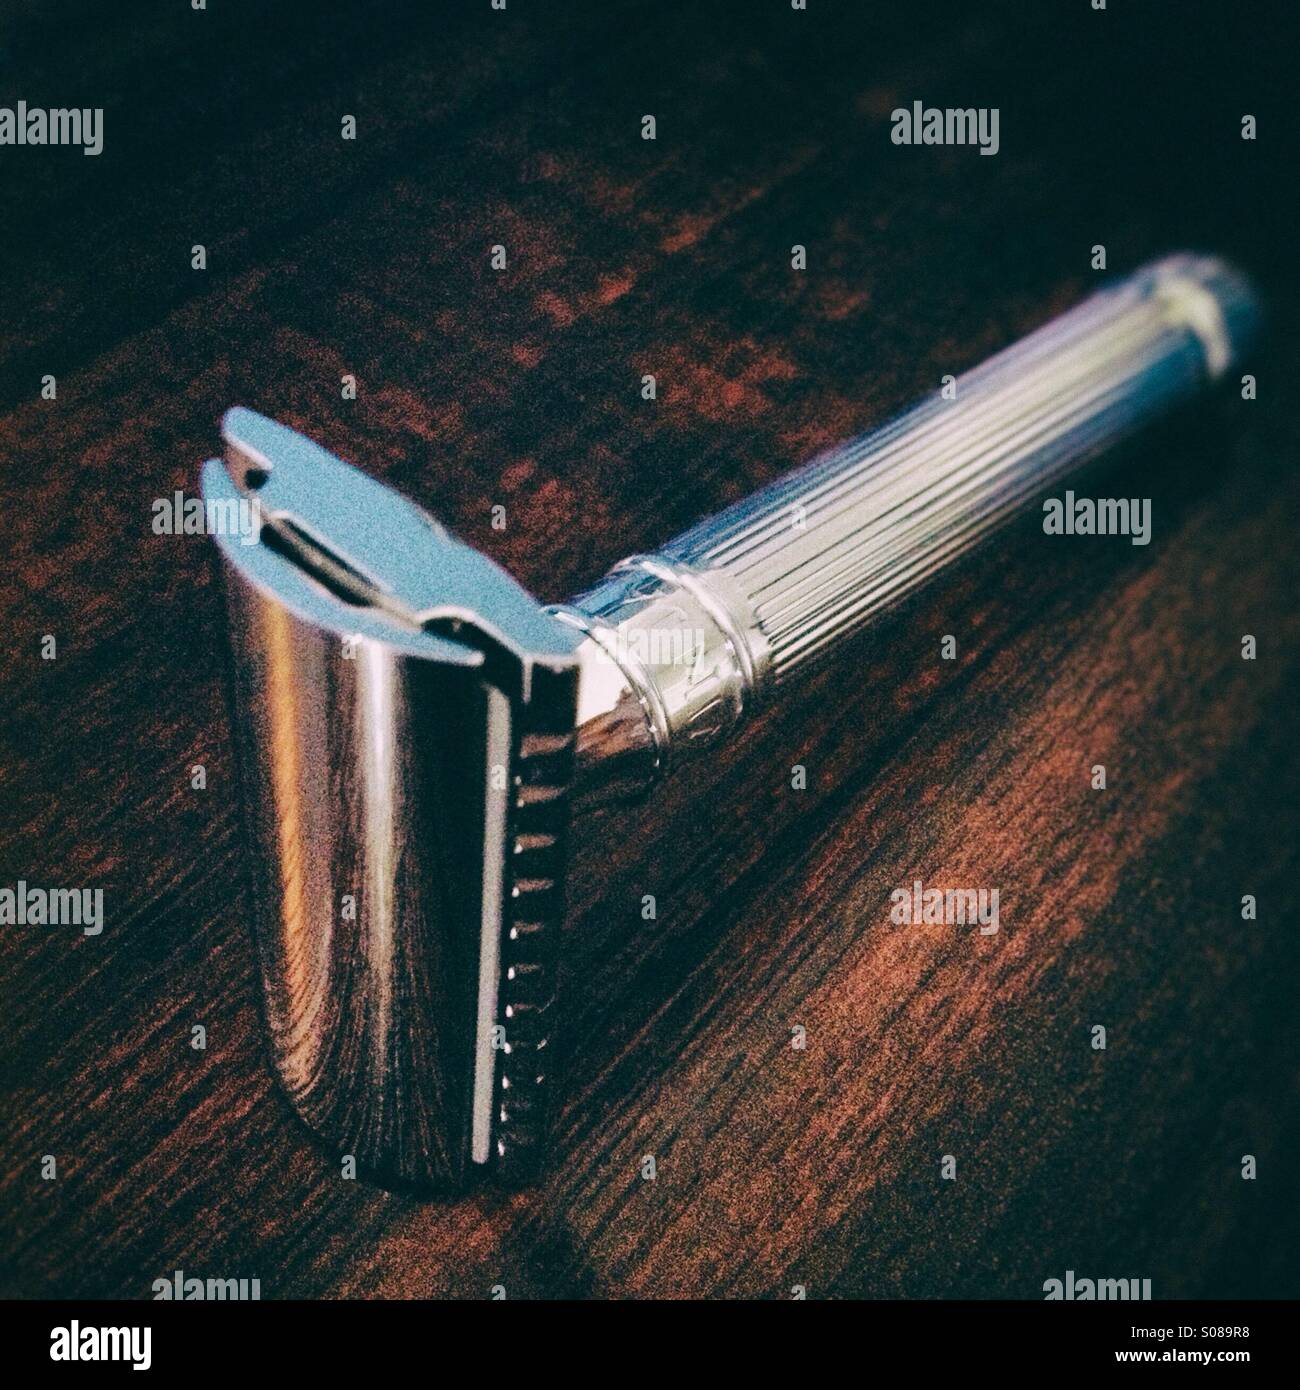 Double edge safety razor photographed on a wooden worktop Stock Photo